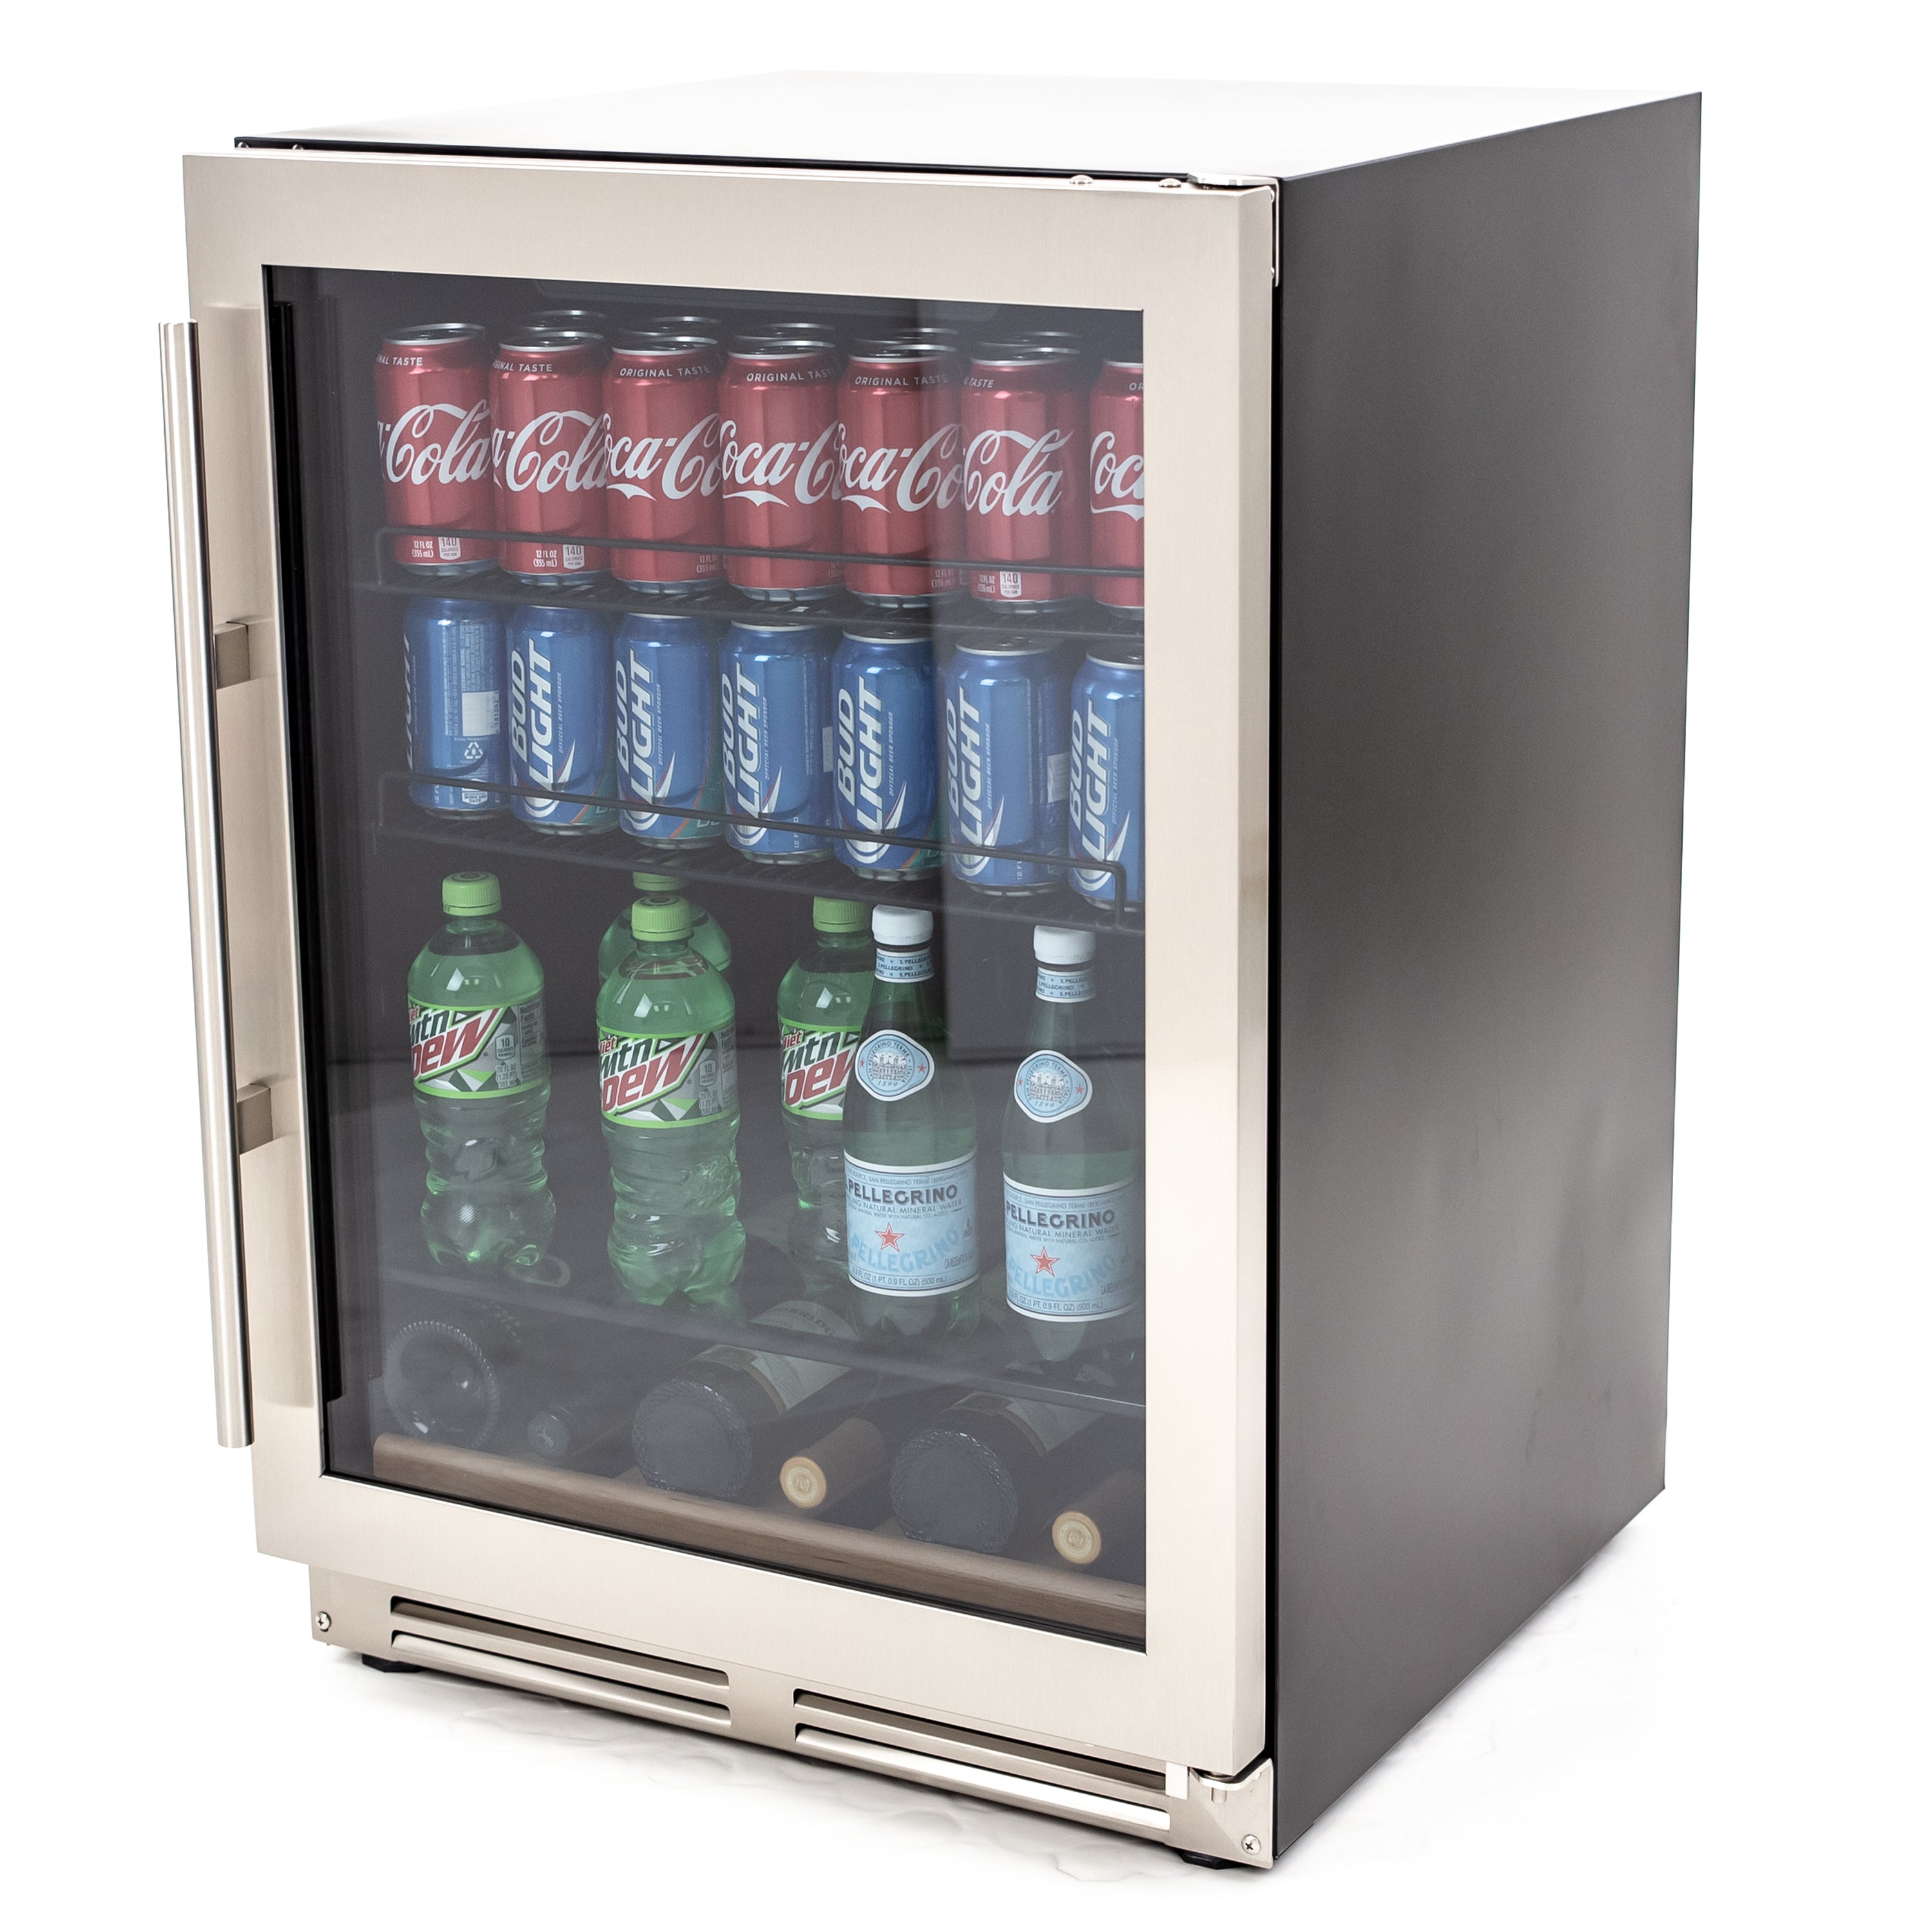 Avanti - BCF54S3S, Avanti Beverage Center, 126 Can Capacity, in Stainless Steel with Black Cabinet